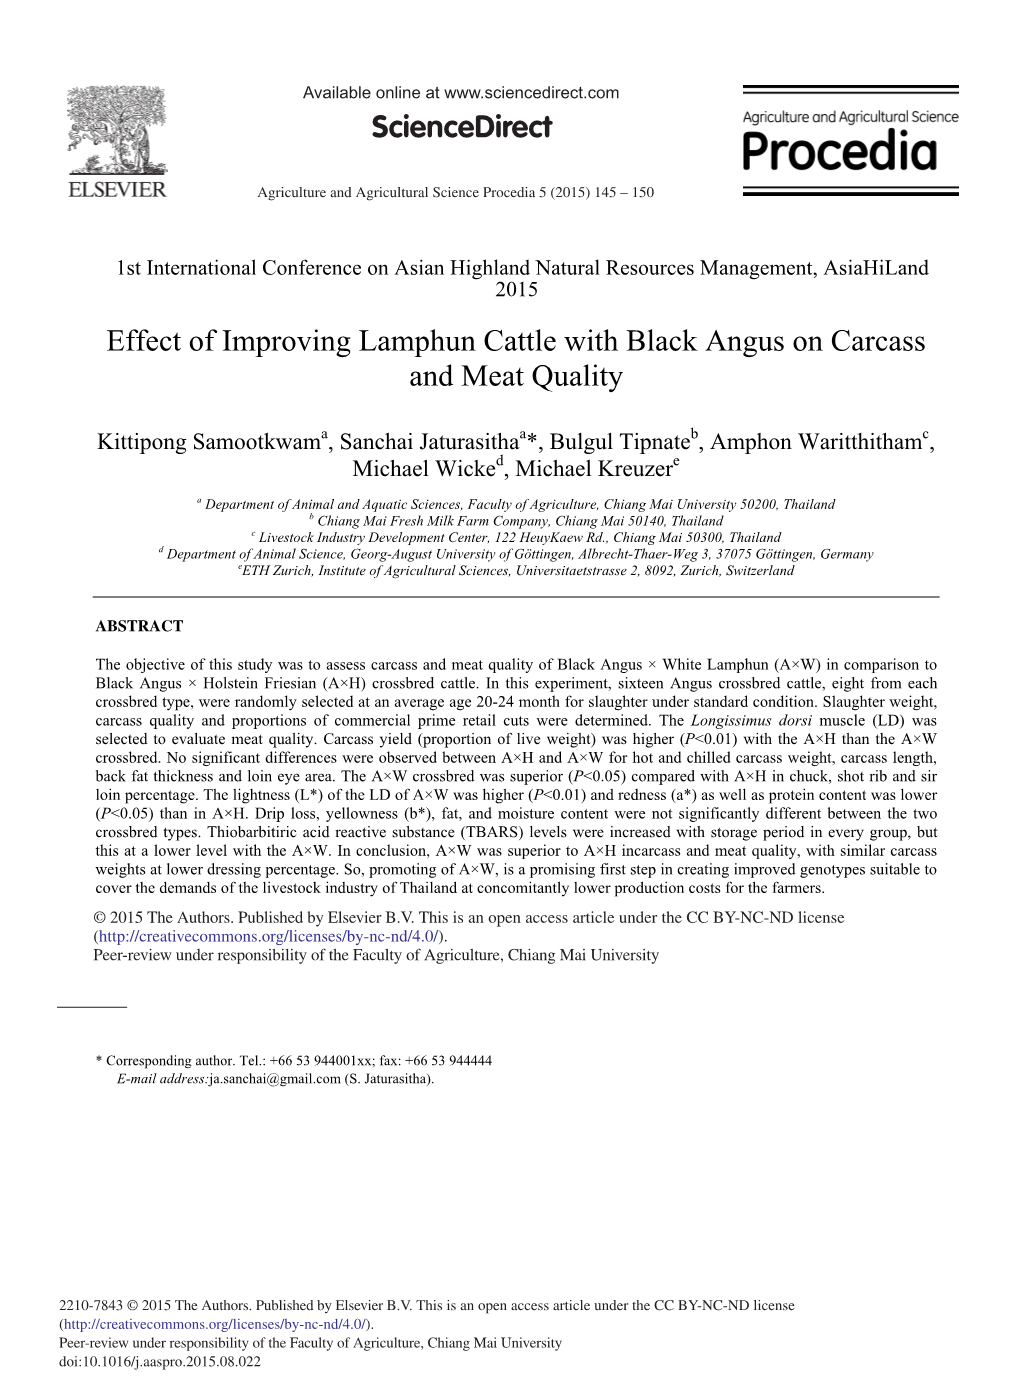 Effect of Improving Lamphun Cattle with Black Angus on Carcass and Meat Quality